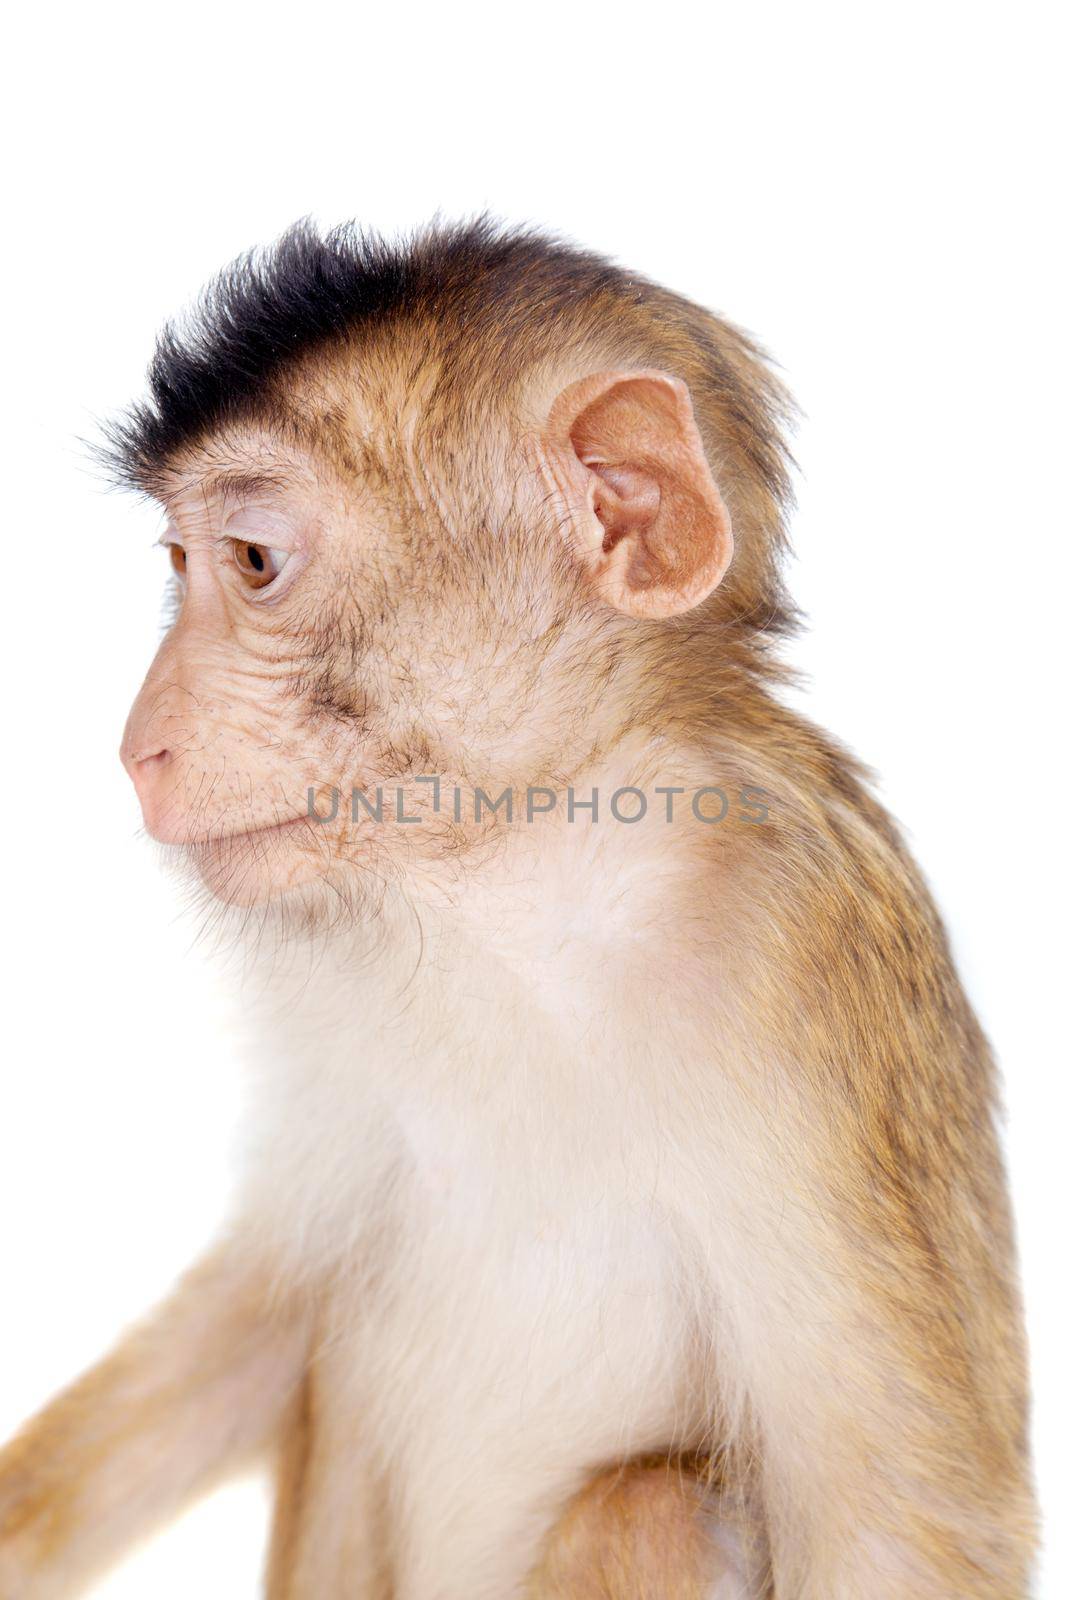 Juvenile Pig-tailed Macaque, Macaca nemestrina, on white by RosaJay